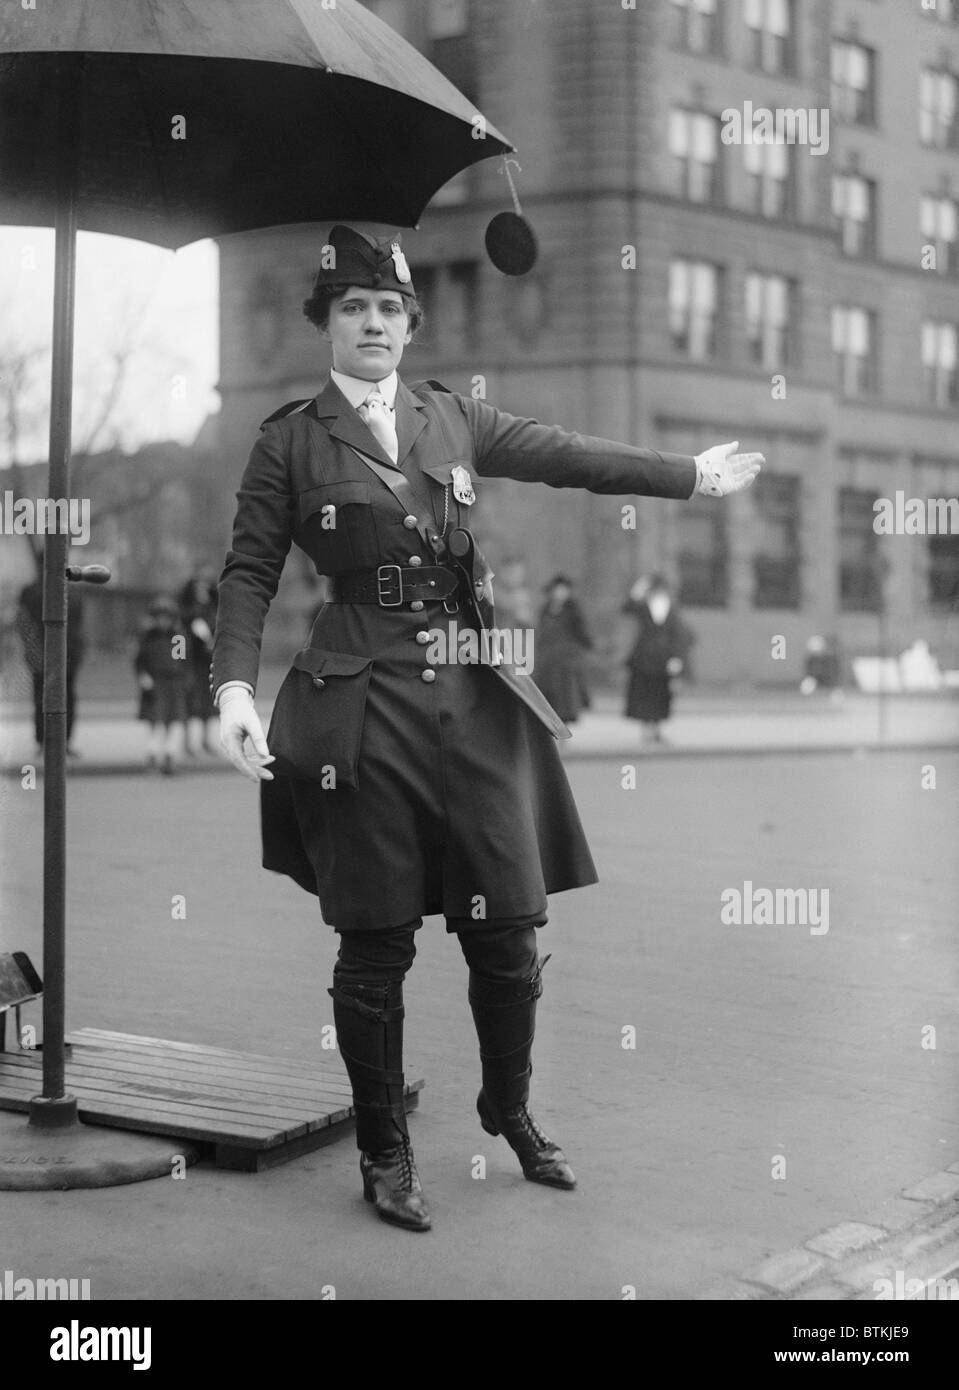 Policewoman directing traffic in Washington, D.C. in 1918. Her progressive uniform combines knee high boots, below knee pants, and a knee length jacket. During the First World War, women filled many men's jobs. Stock Photo